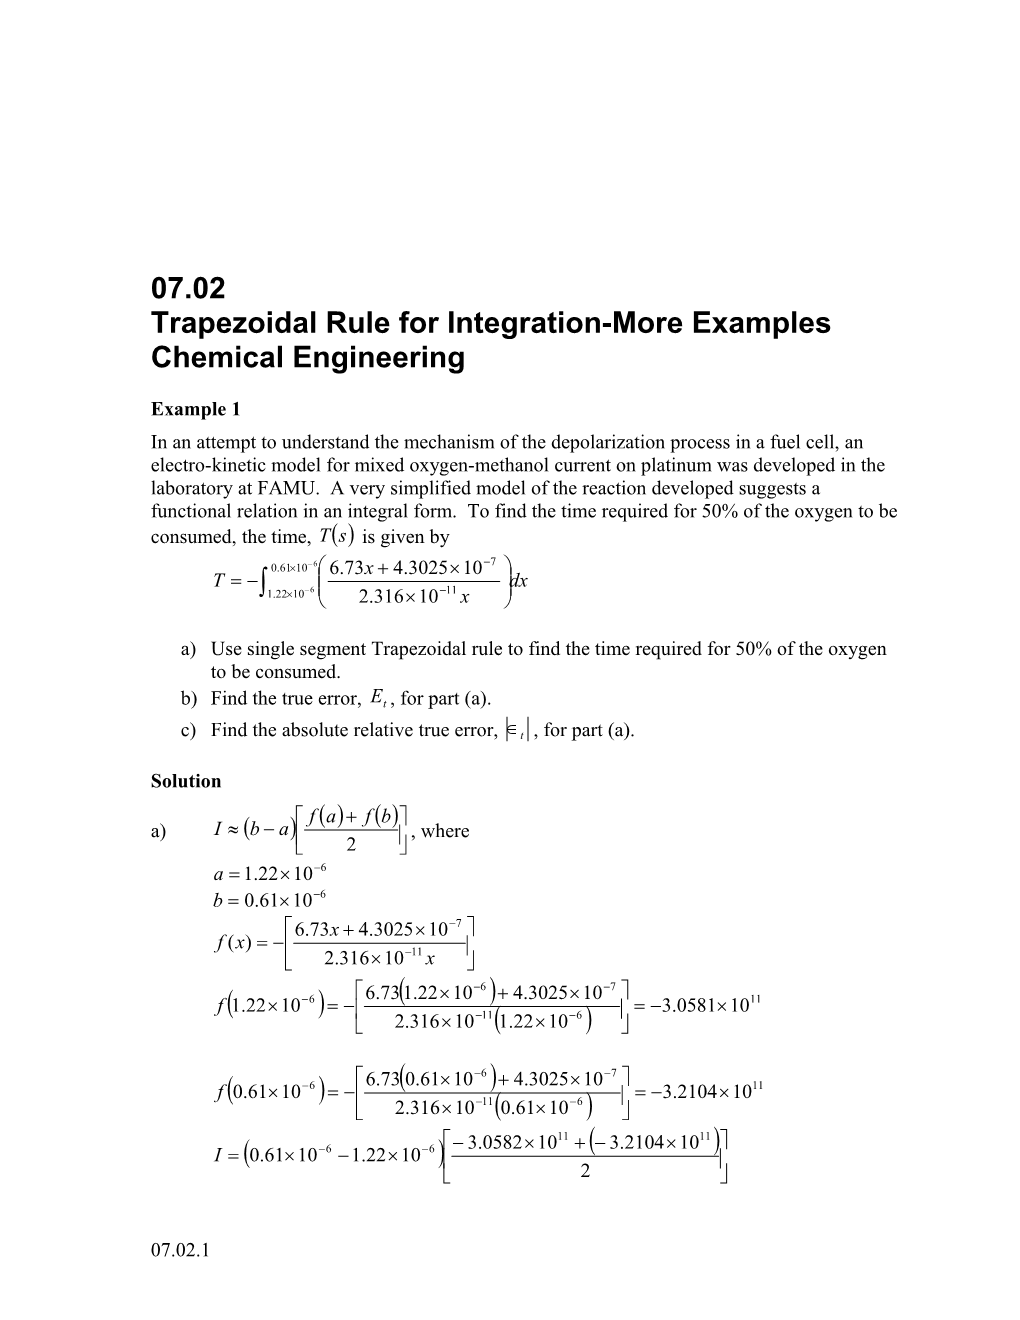 Trapezoidal Rule for Integration-More Examples: Chemical Engineering